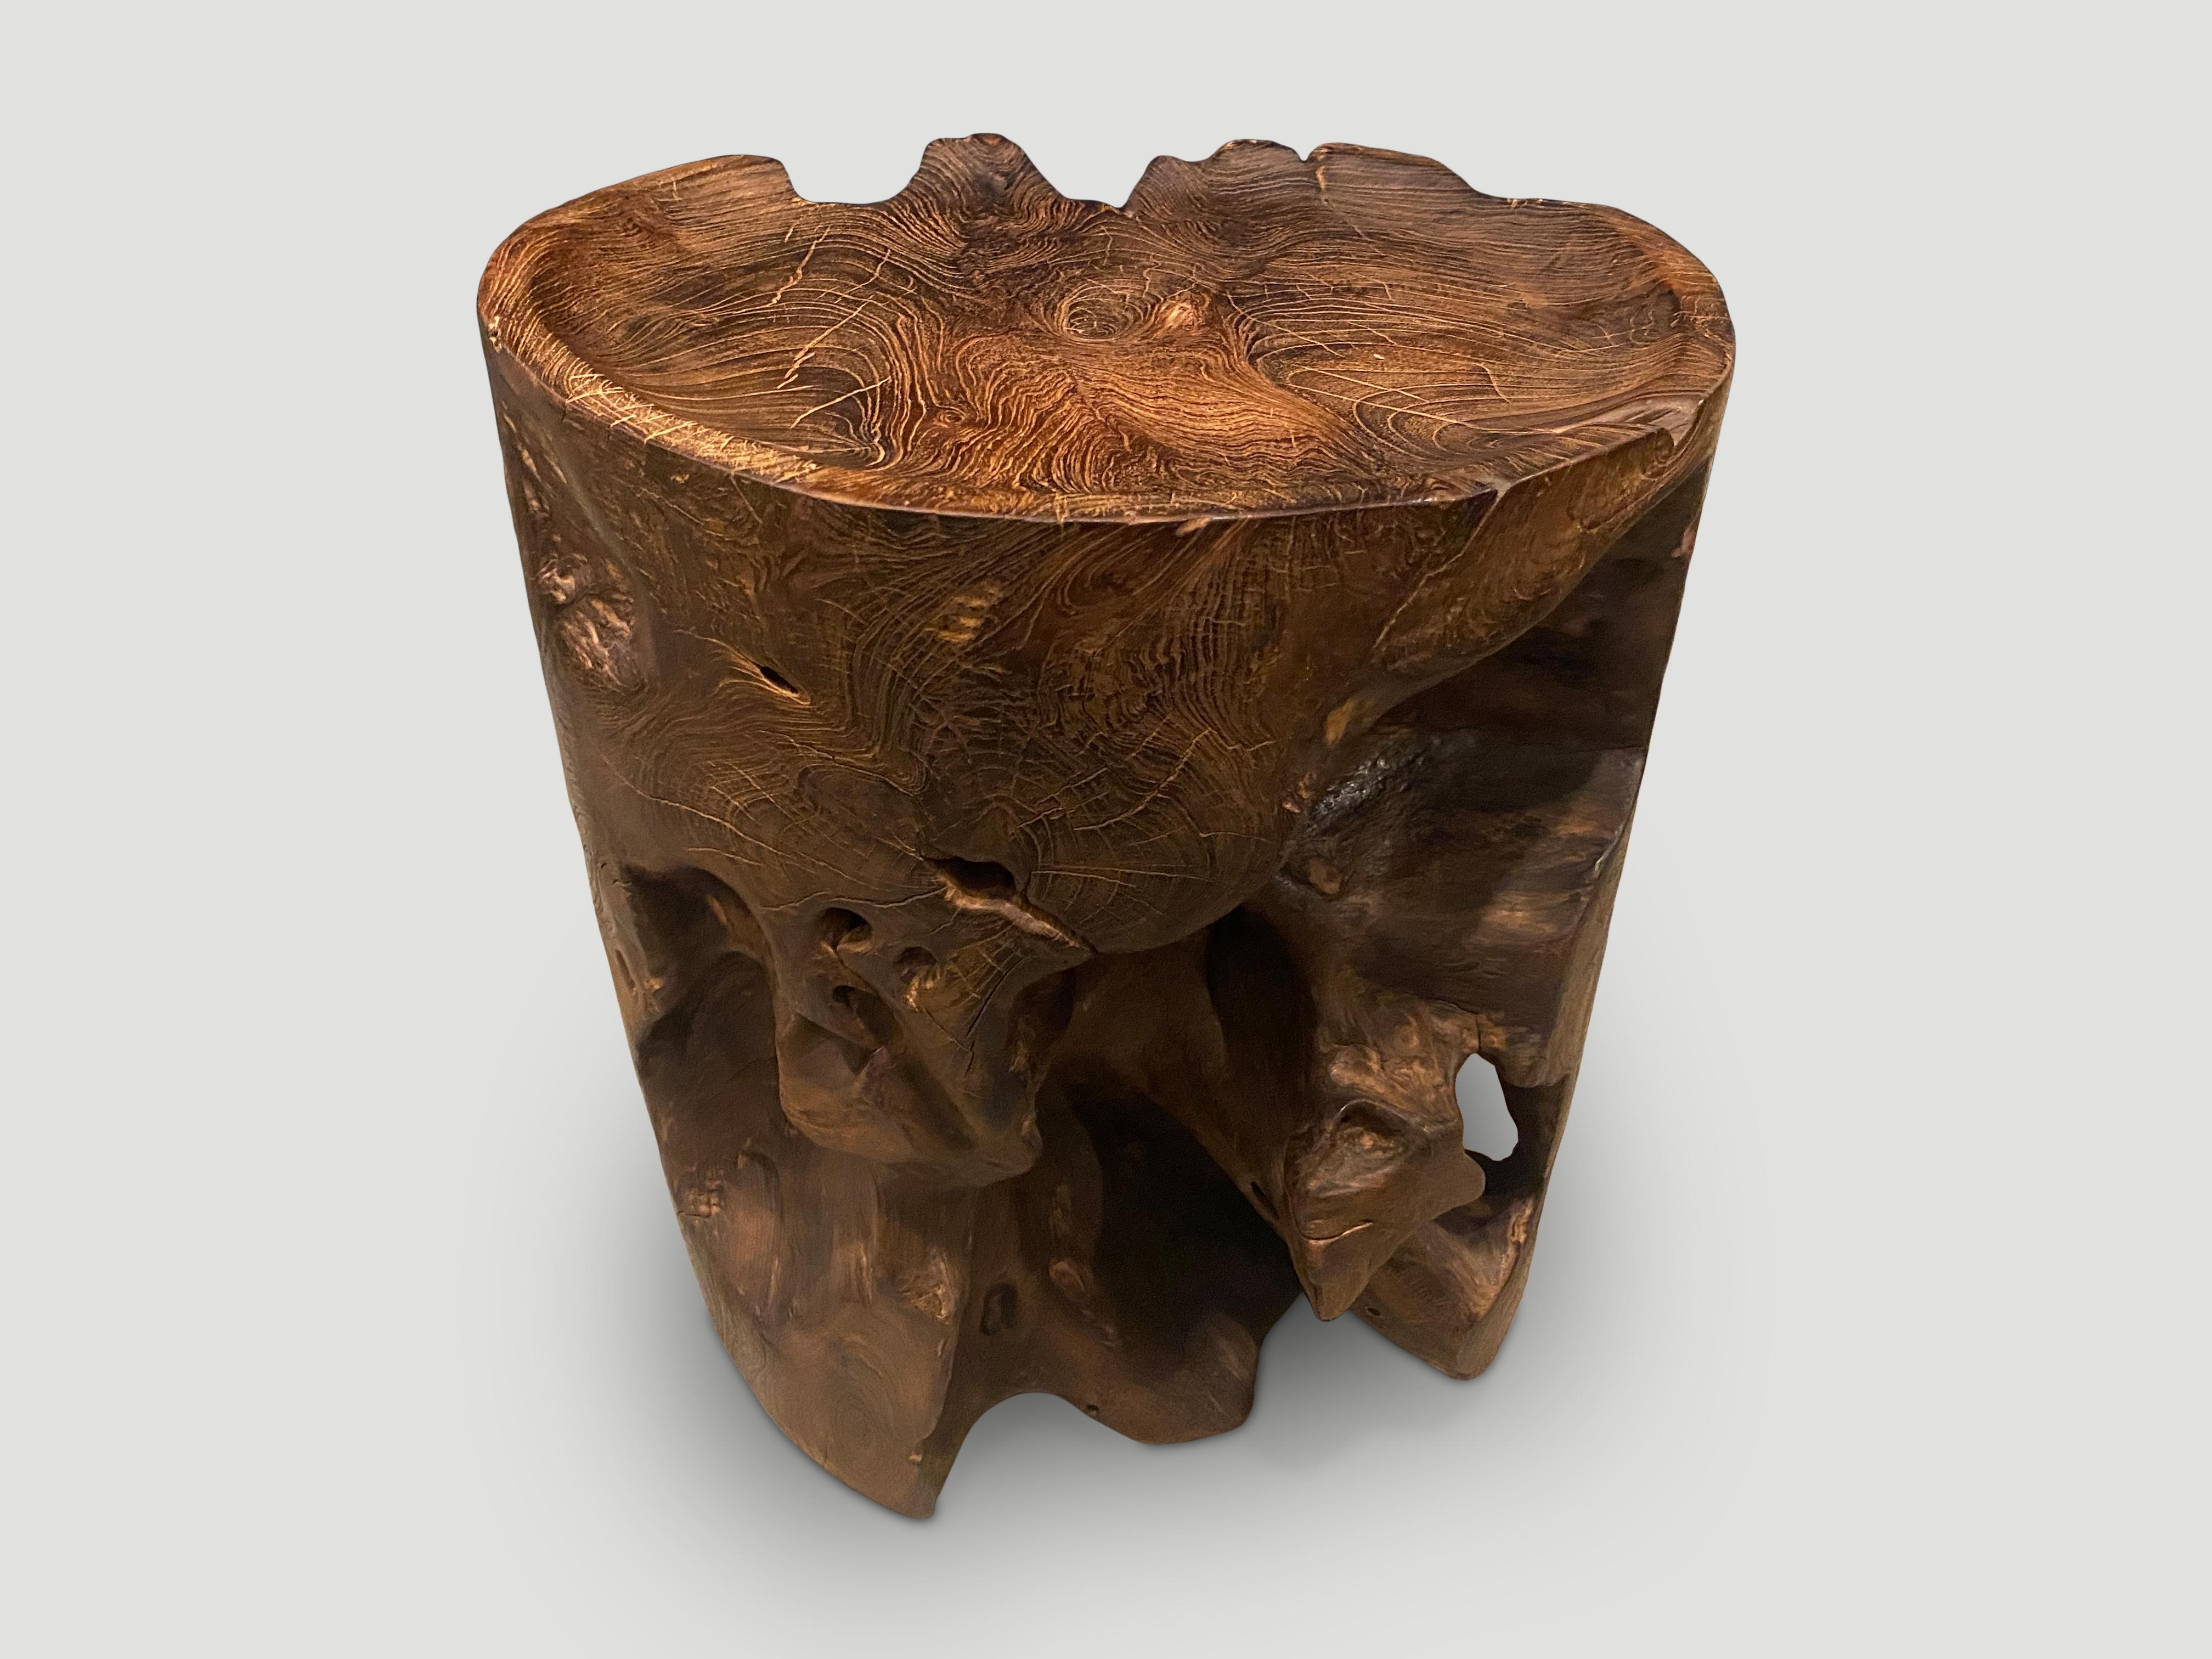 Natural organic formed reclaimed teak root side table. We hand carved the top section into a tray style and charred the aged teak revealing the beautiful wood grain. We have a collection. All unique. The price and size reflect the one shown. 

The